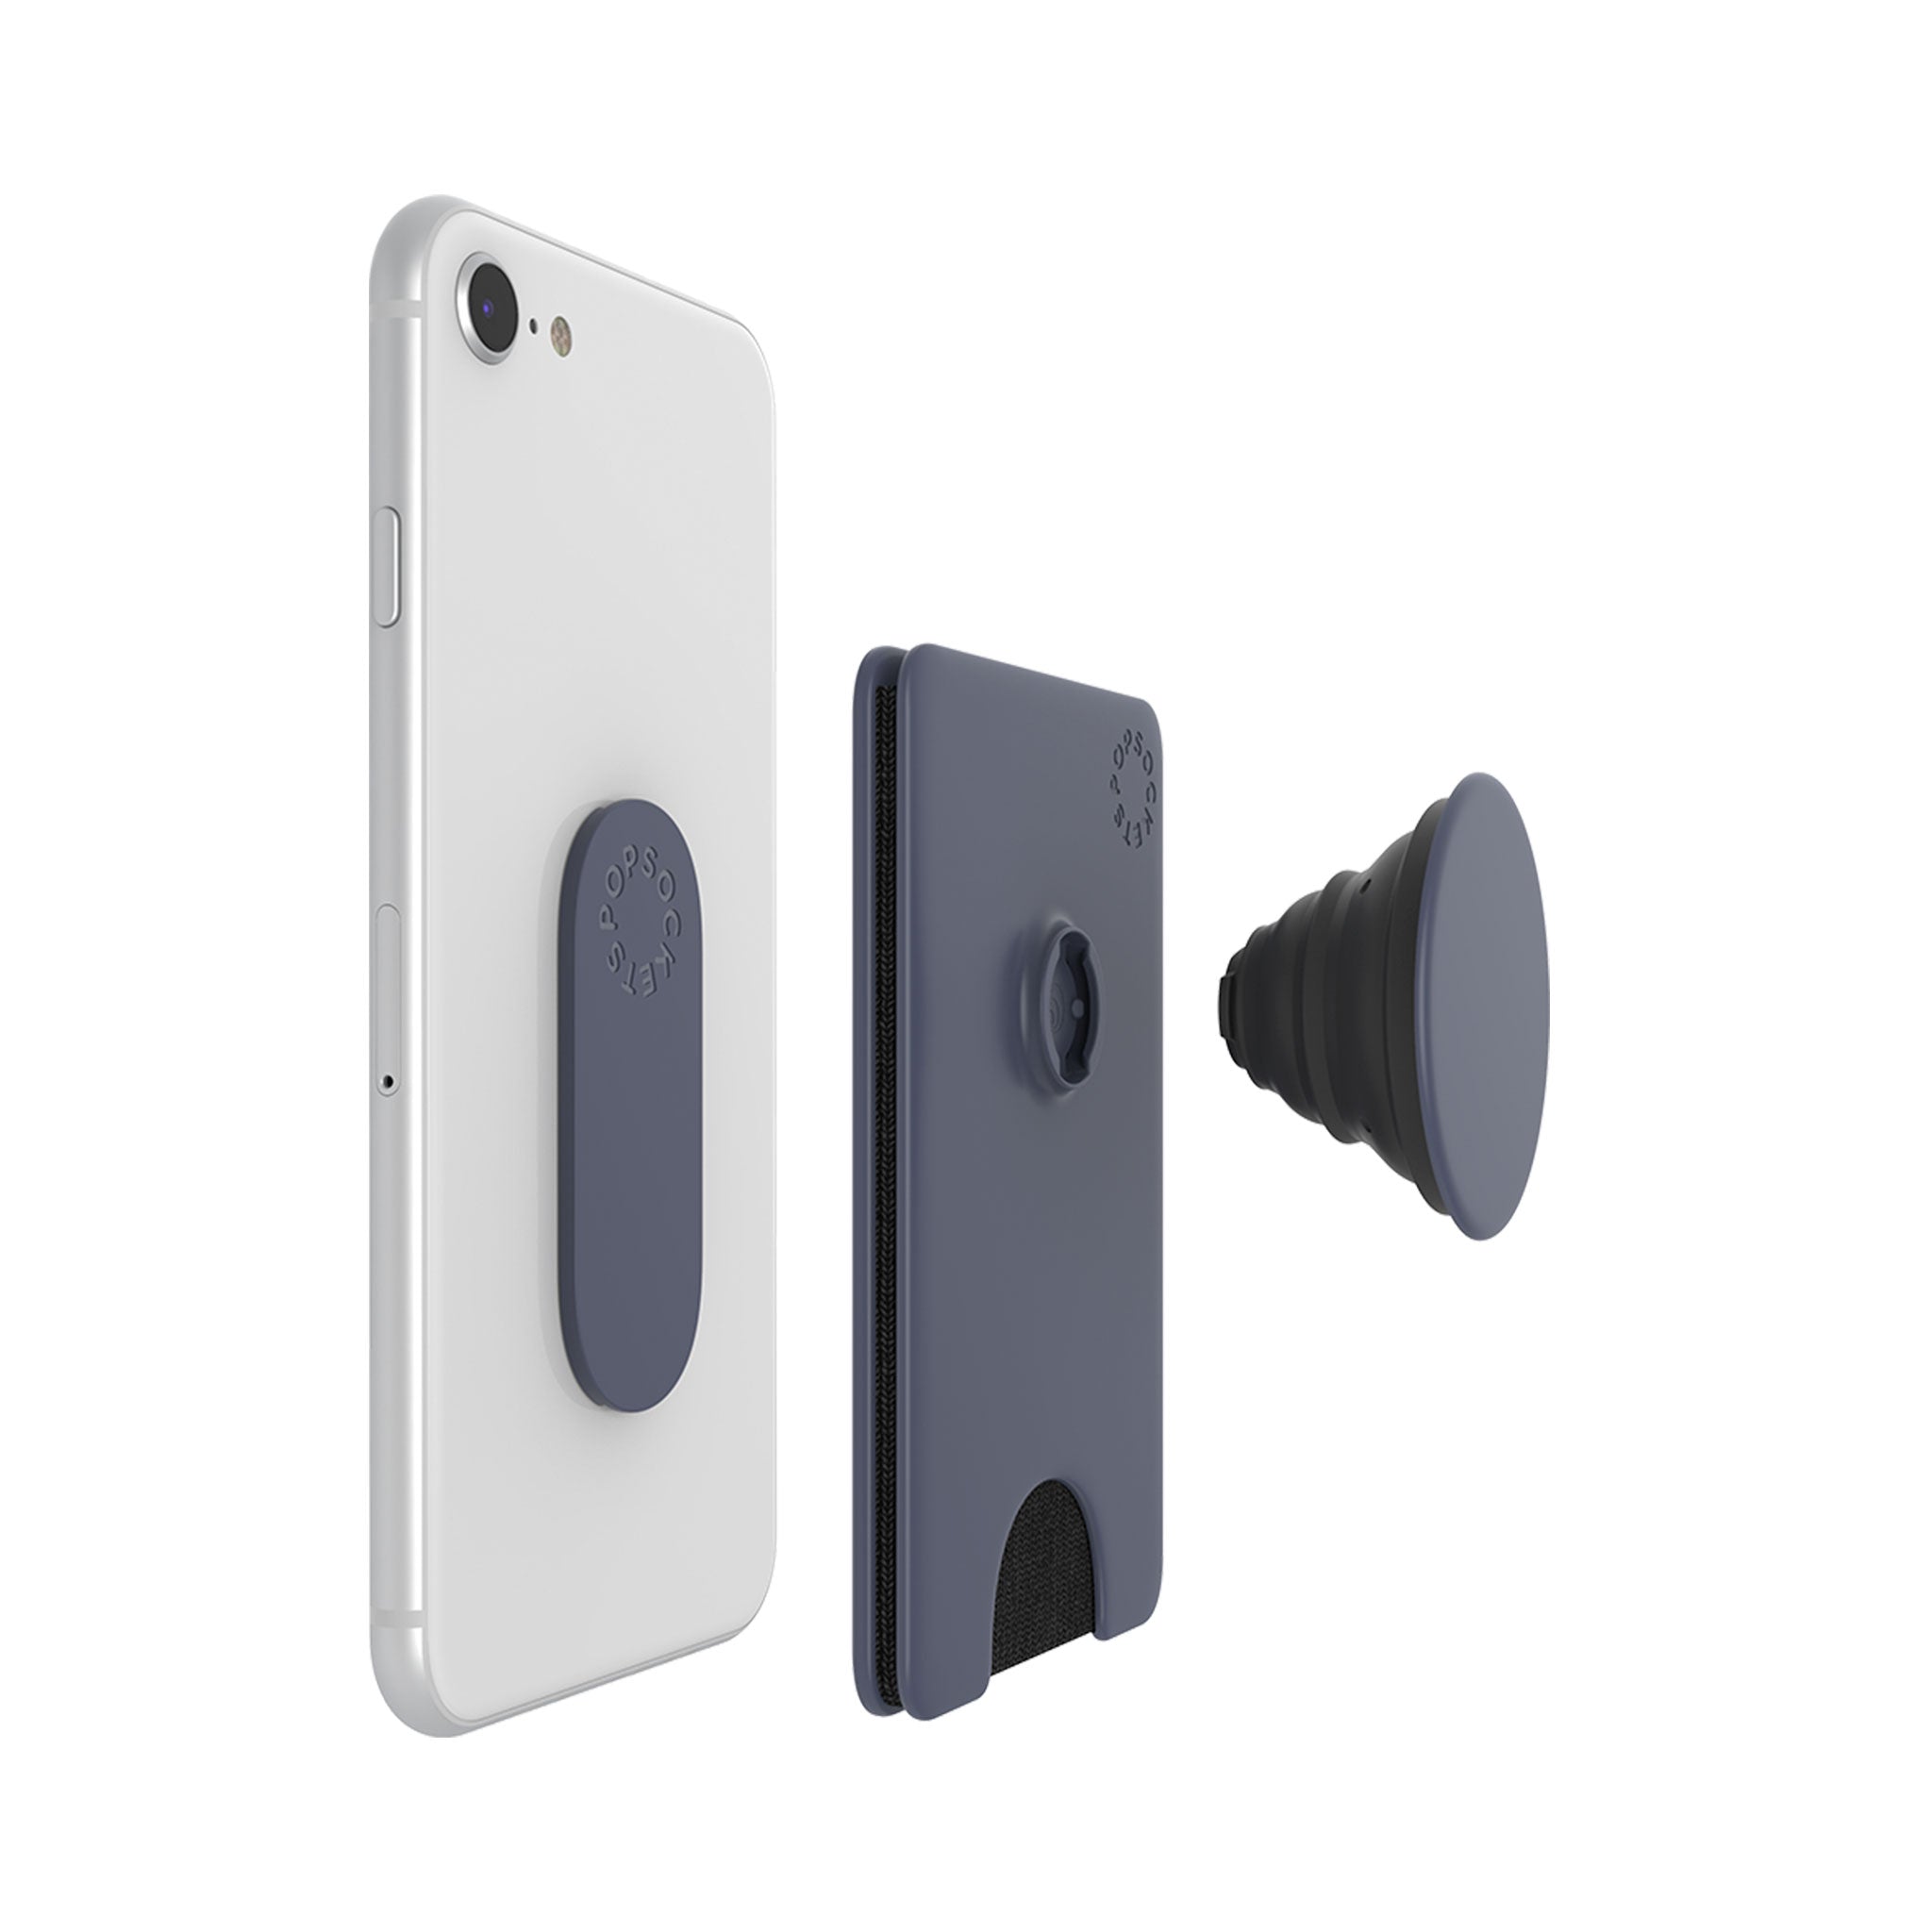 Popsockets - Popwallet Plus With Popgrip - Shadow Blue